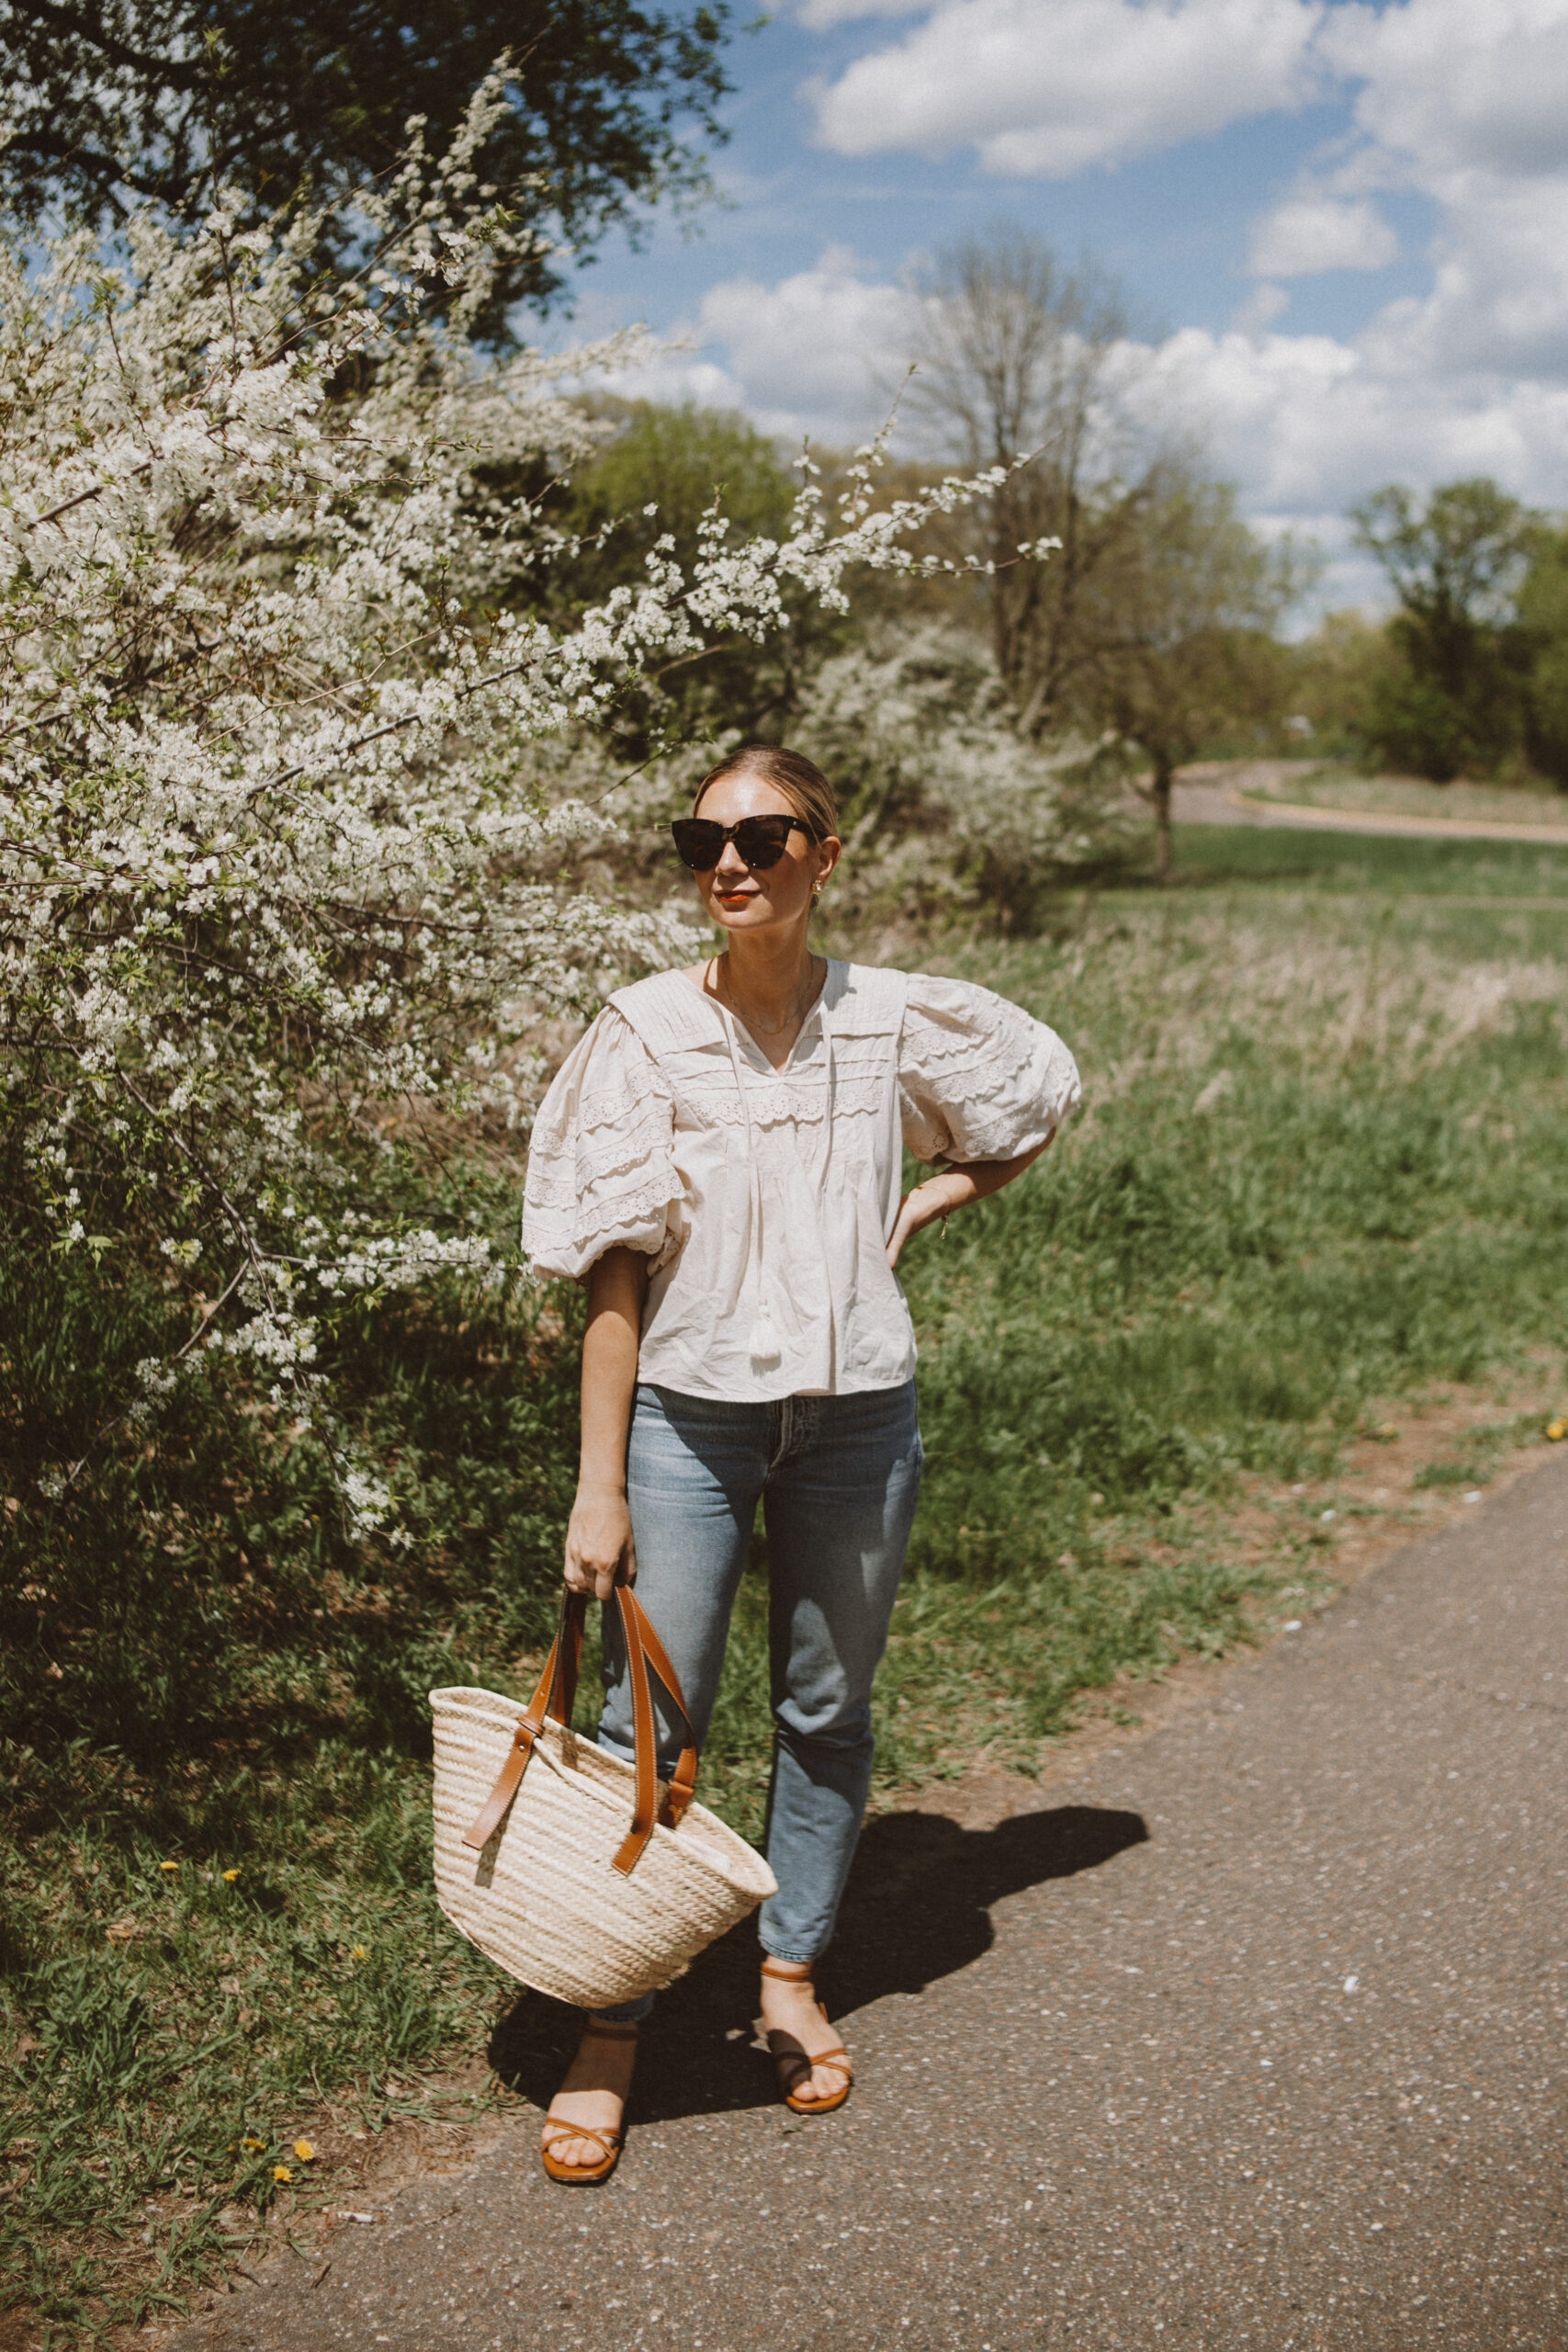 Karin Emily wears a lace puff sleeve top from SEA, Charlotte Jeans from Citizens of Humanity, and brown strappy sandals